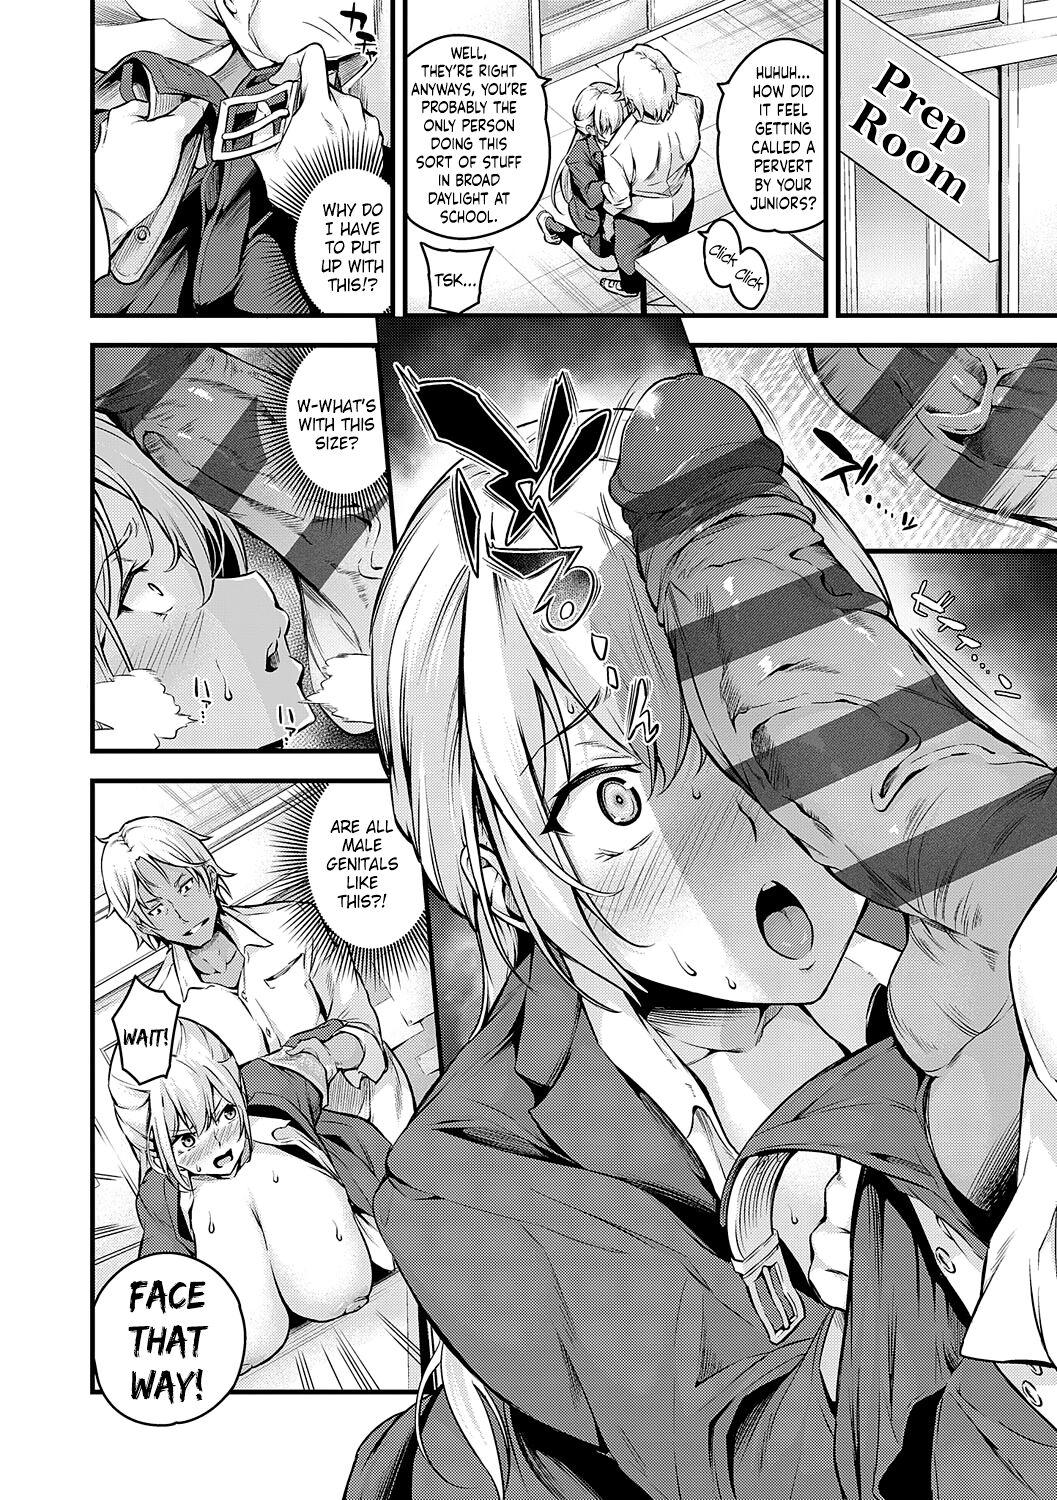 The Fuuki Iin Ichijou no Haiboku | The defeat of Ichijou from the disciplinary committee Real Amateur Porn - Page 10